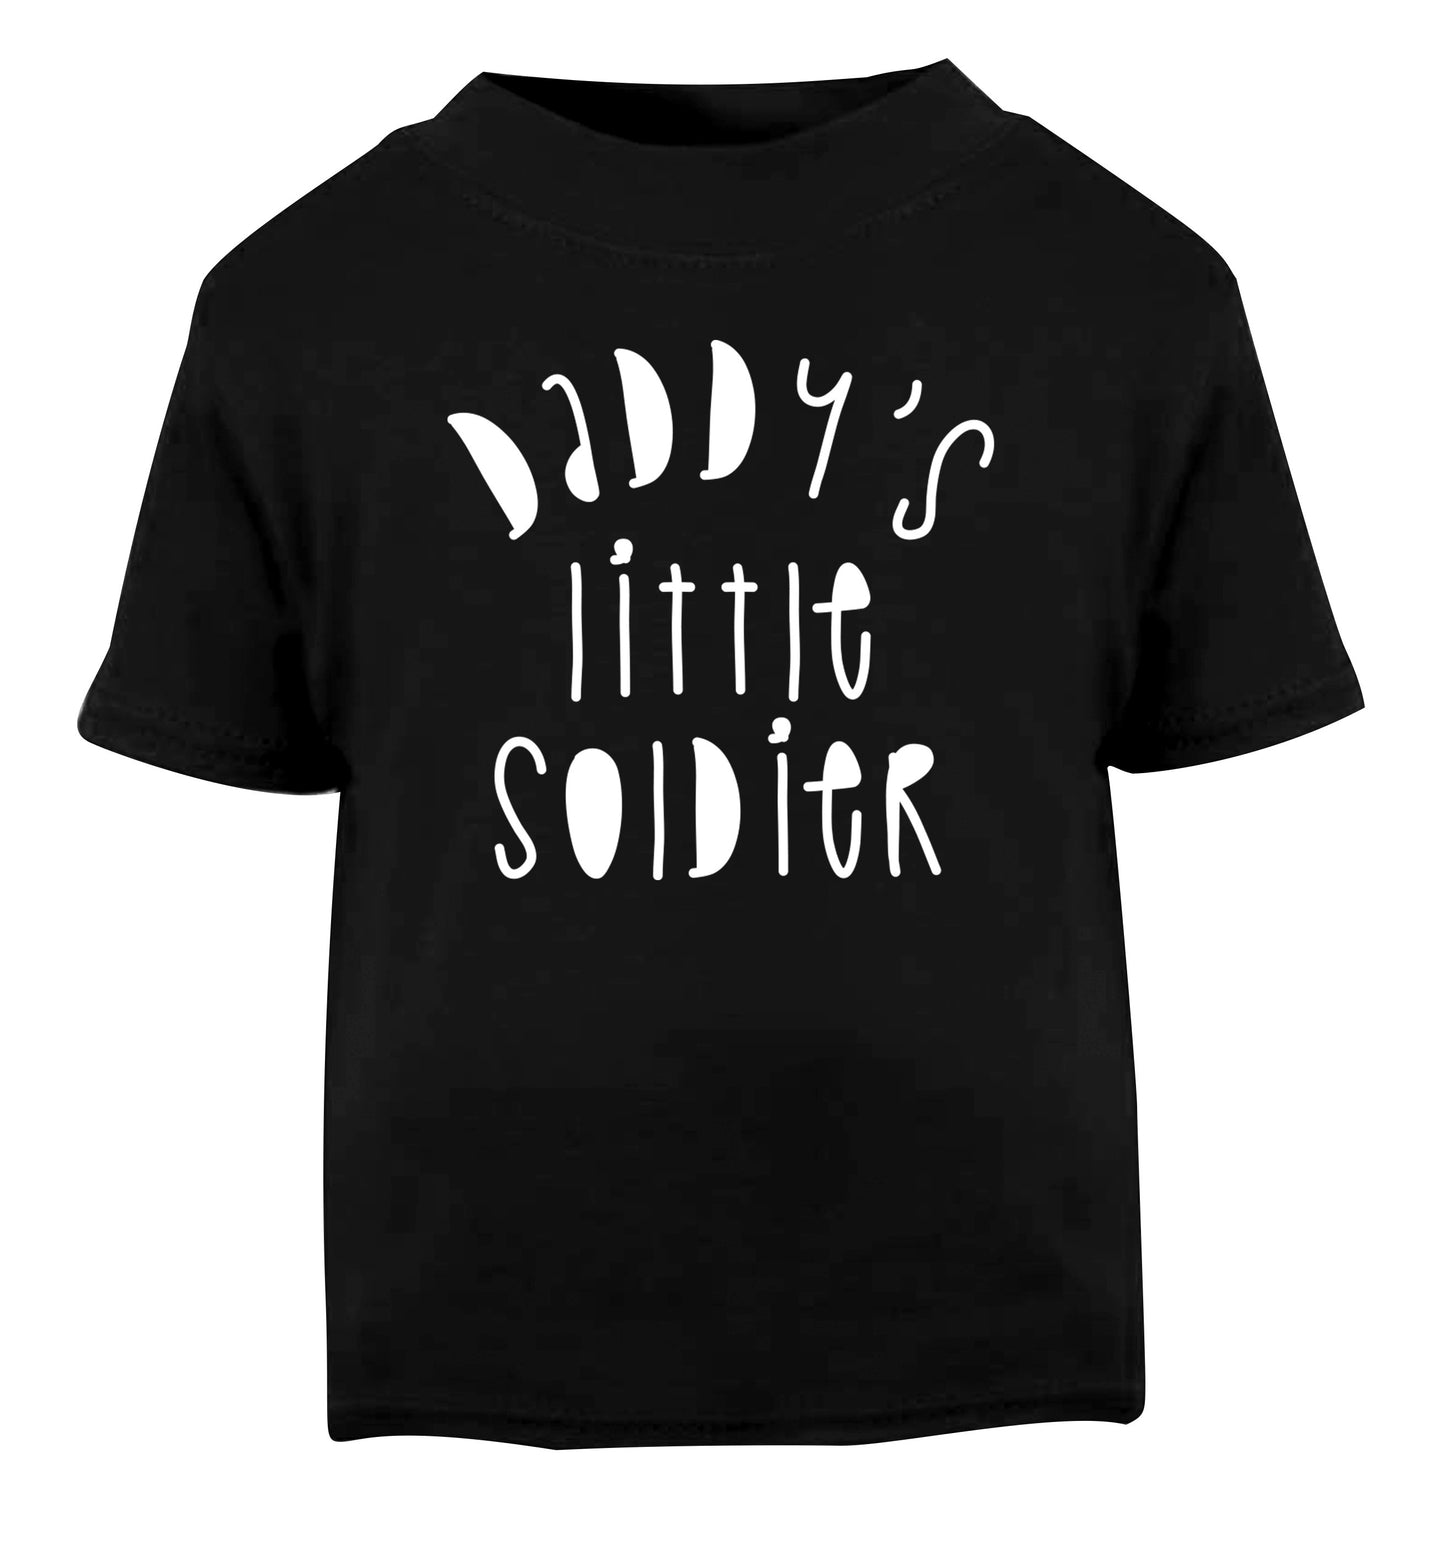 Daddy's little soldier Black Baby Toddler Tshirt 2 years